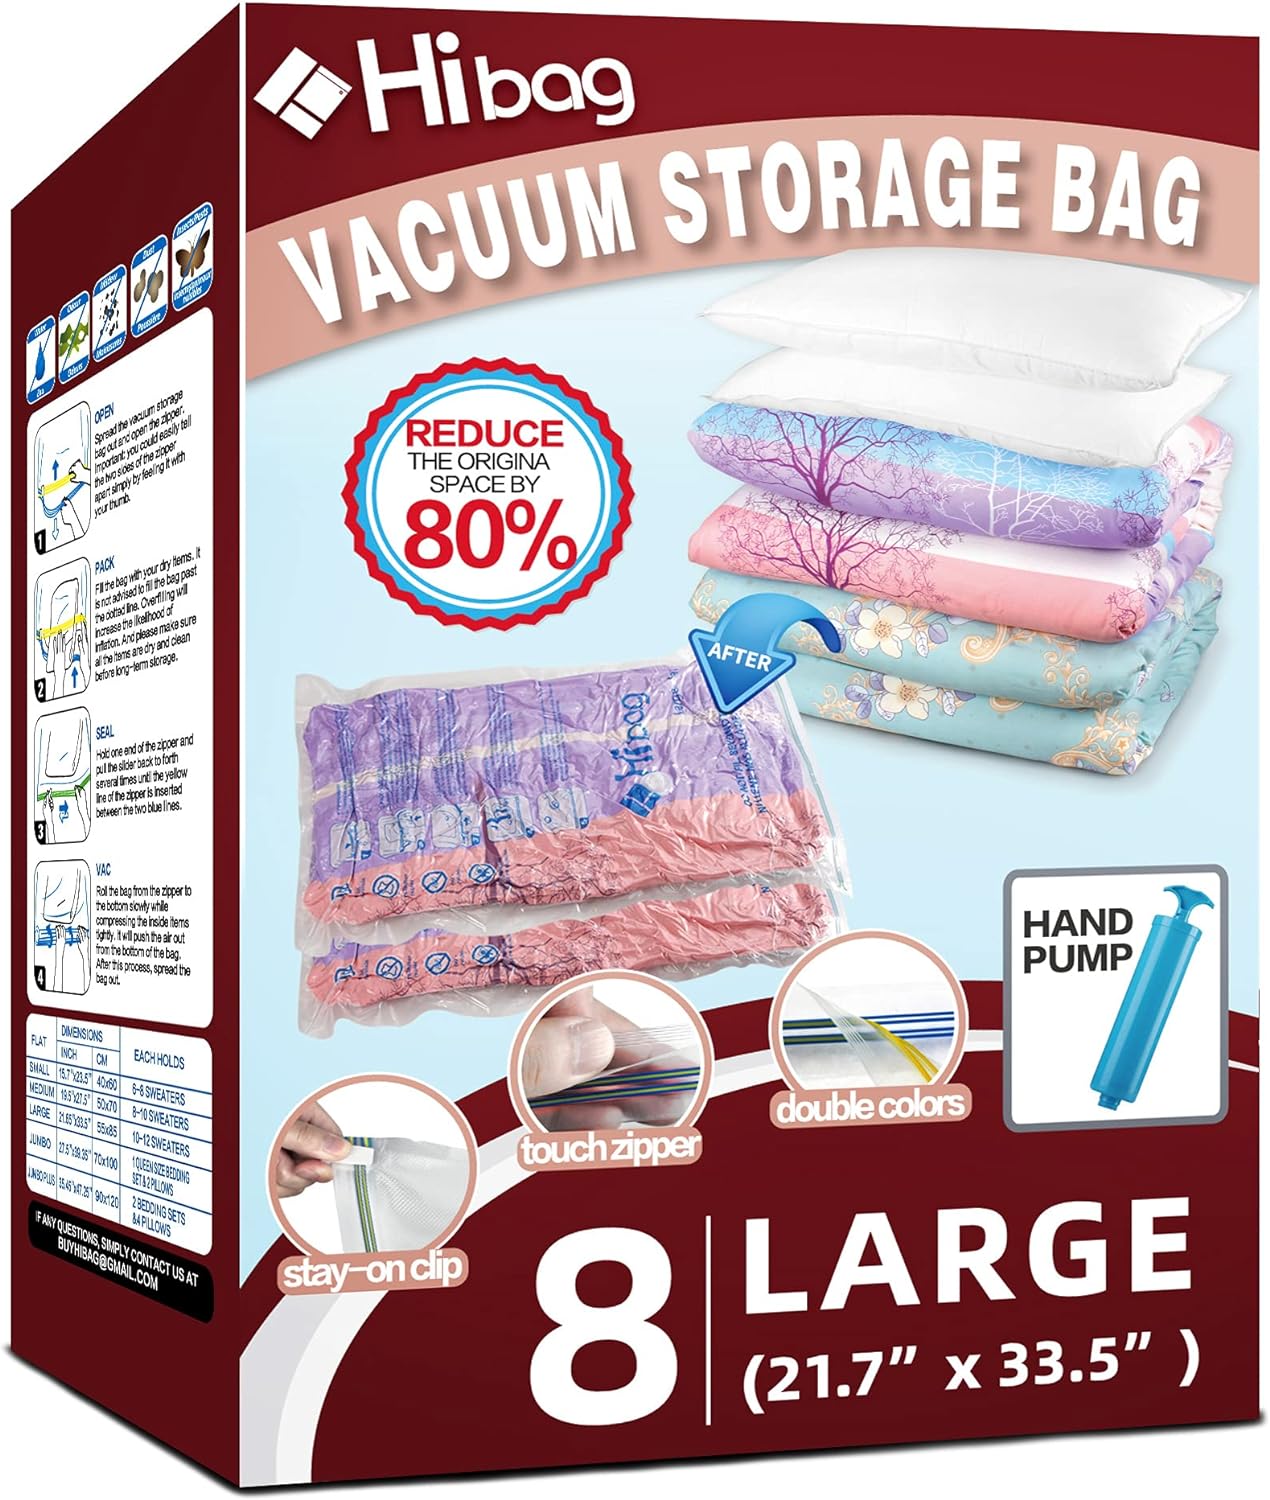 Space Saver Bags, 8 Large Vacuum Storage Bags with Hand Pump for Home Storage and Travel Usage (8-Large)